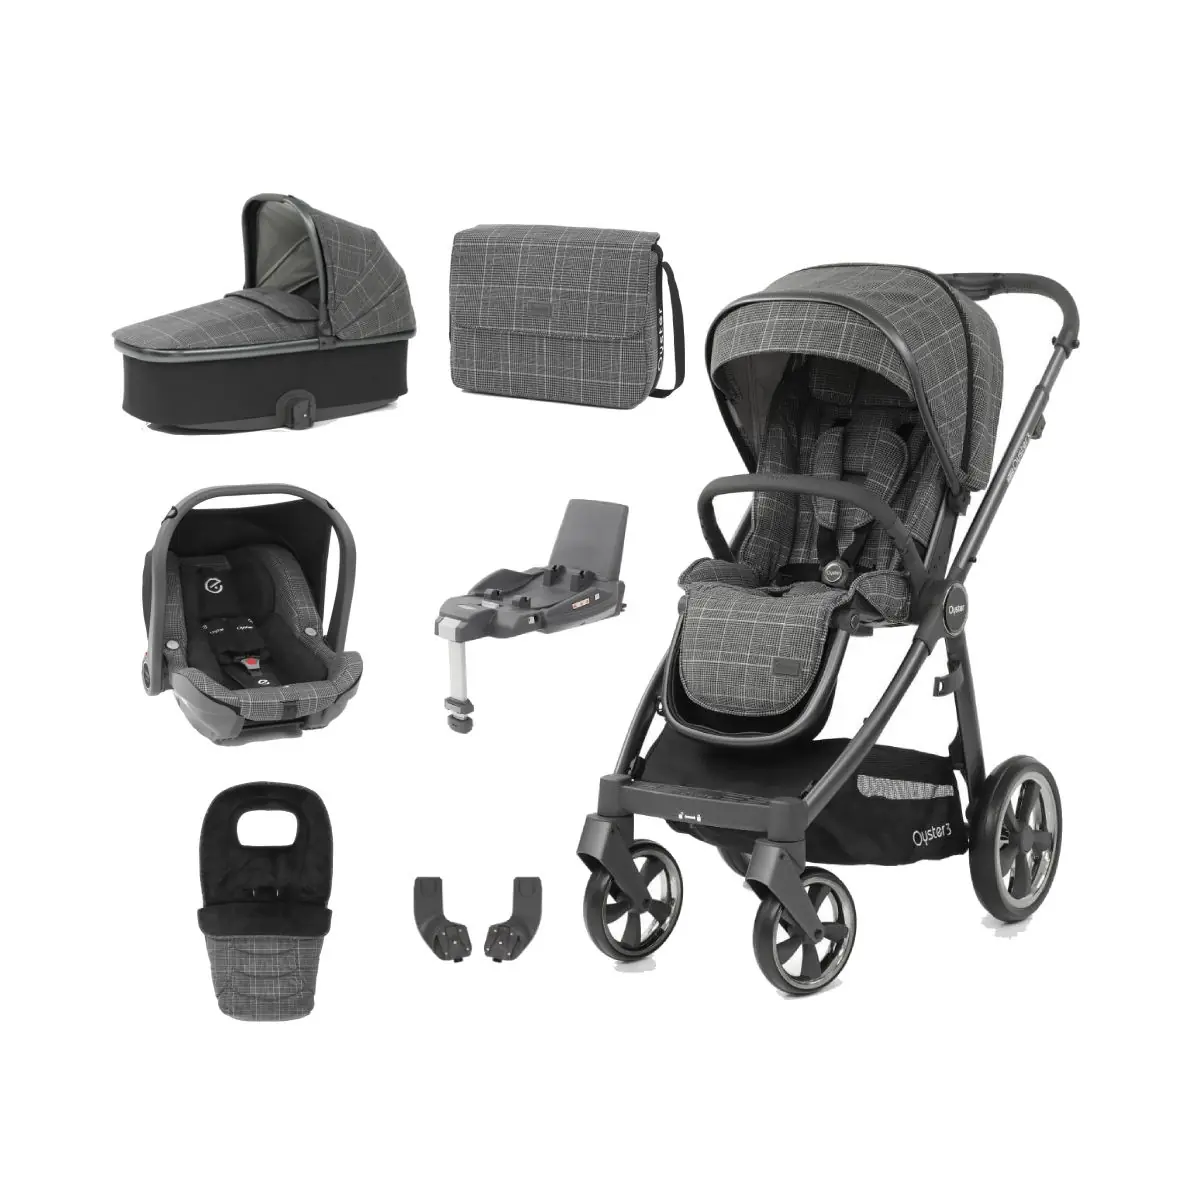 Image of BabyStyle Oyster 3 City Grey Finish 7 Piece Luxury Travel System - Manhattan